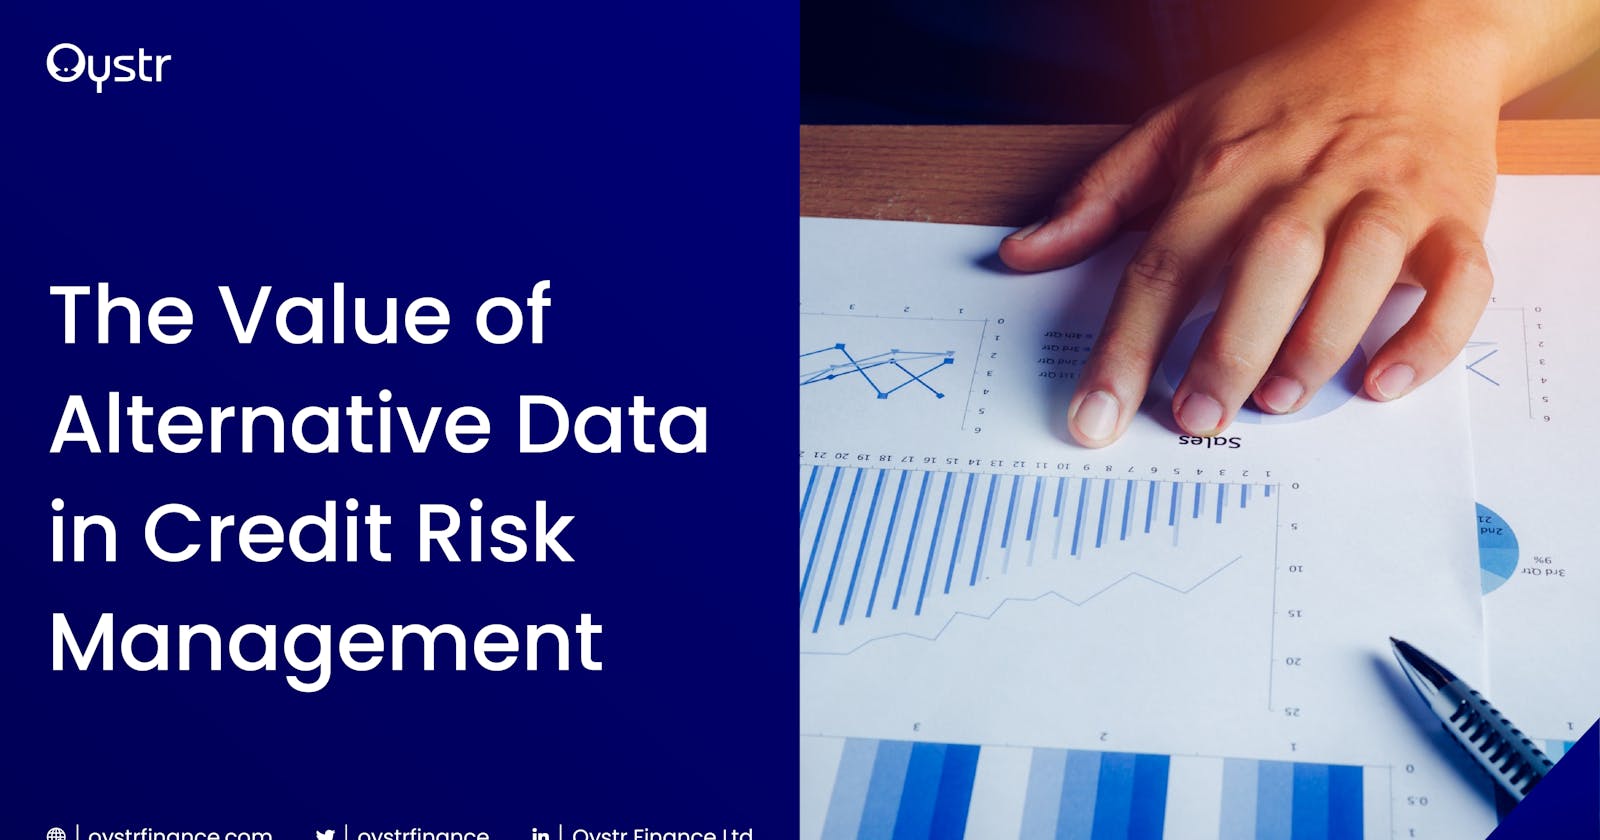 The Value of Alternative Data in Credit Risk Management